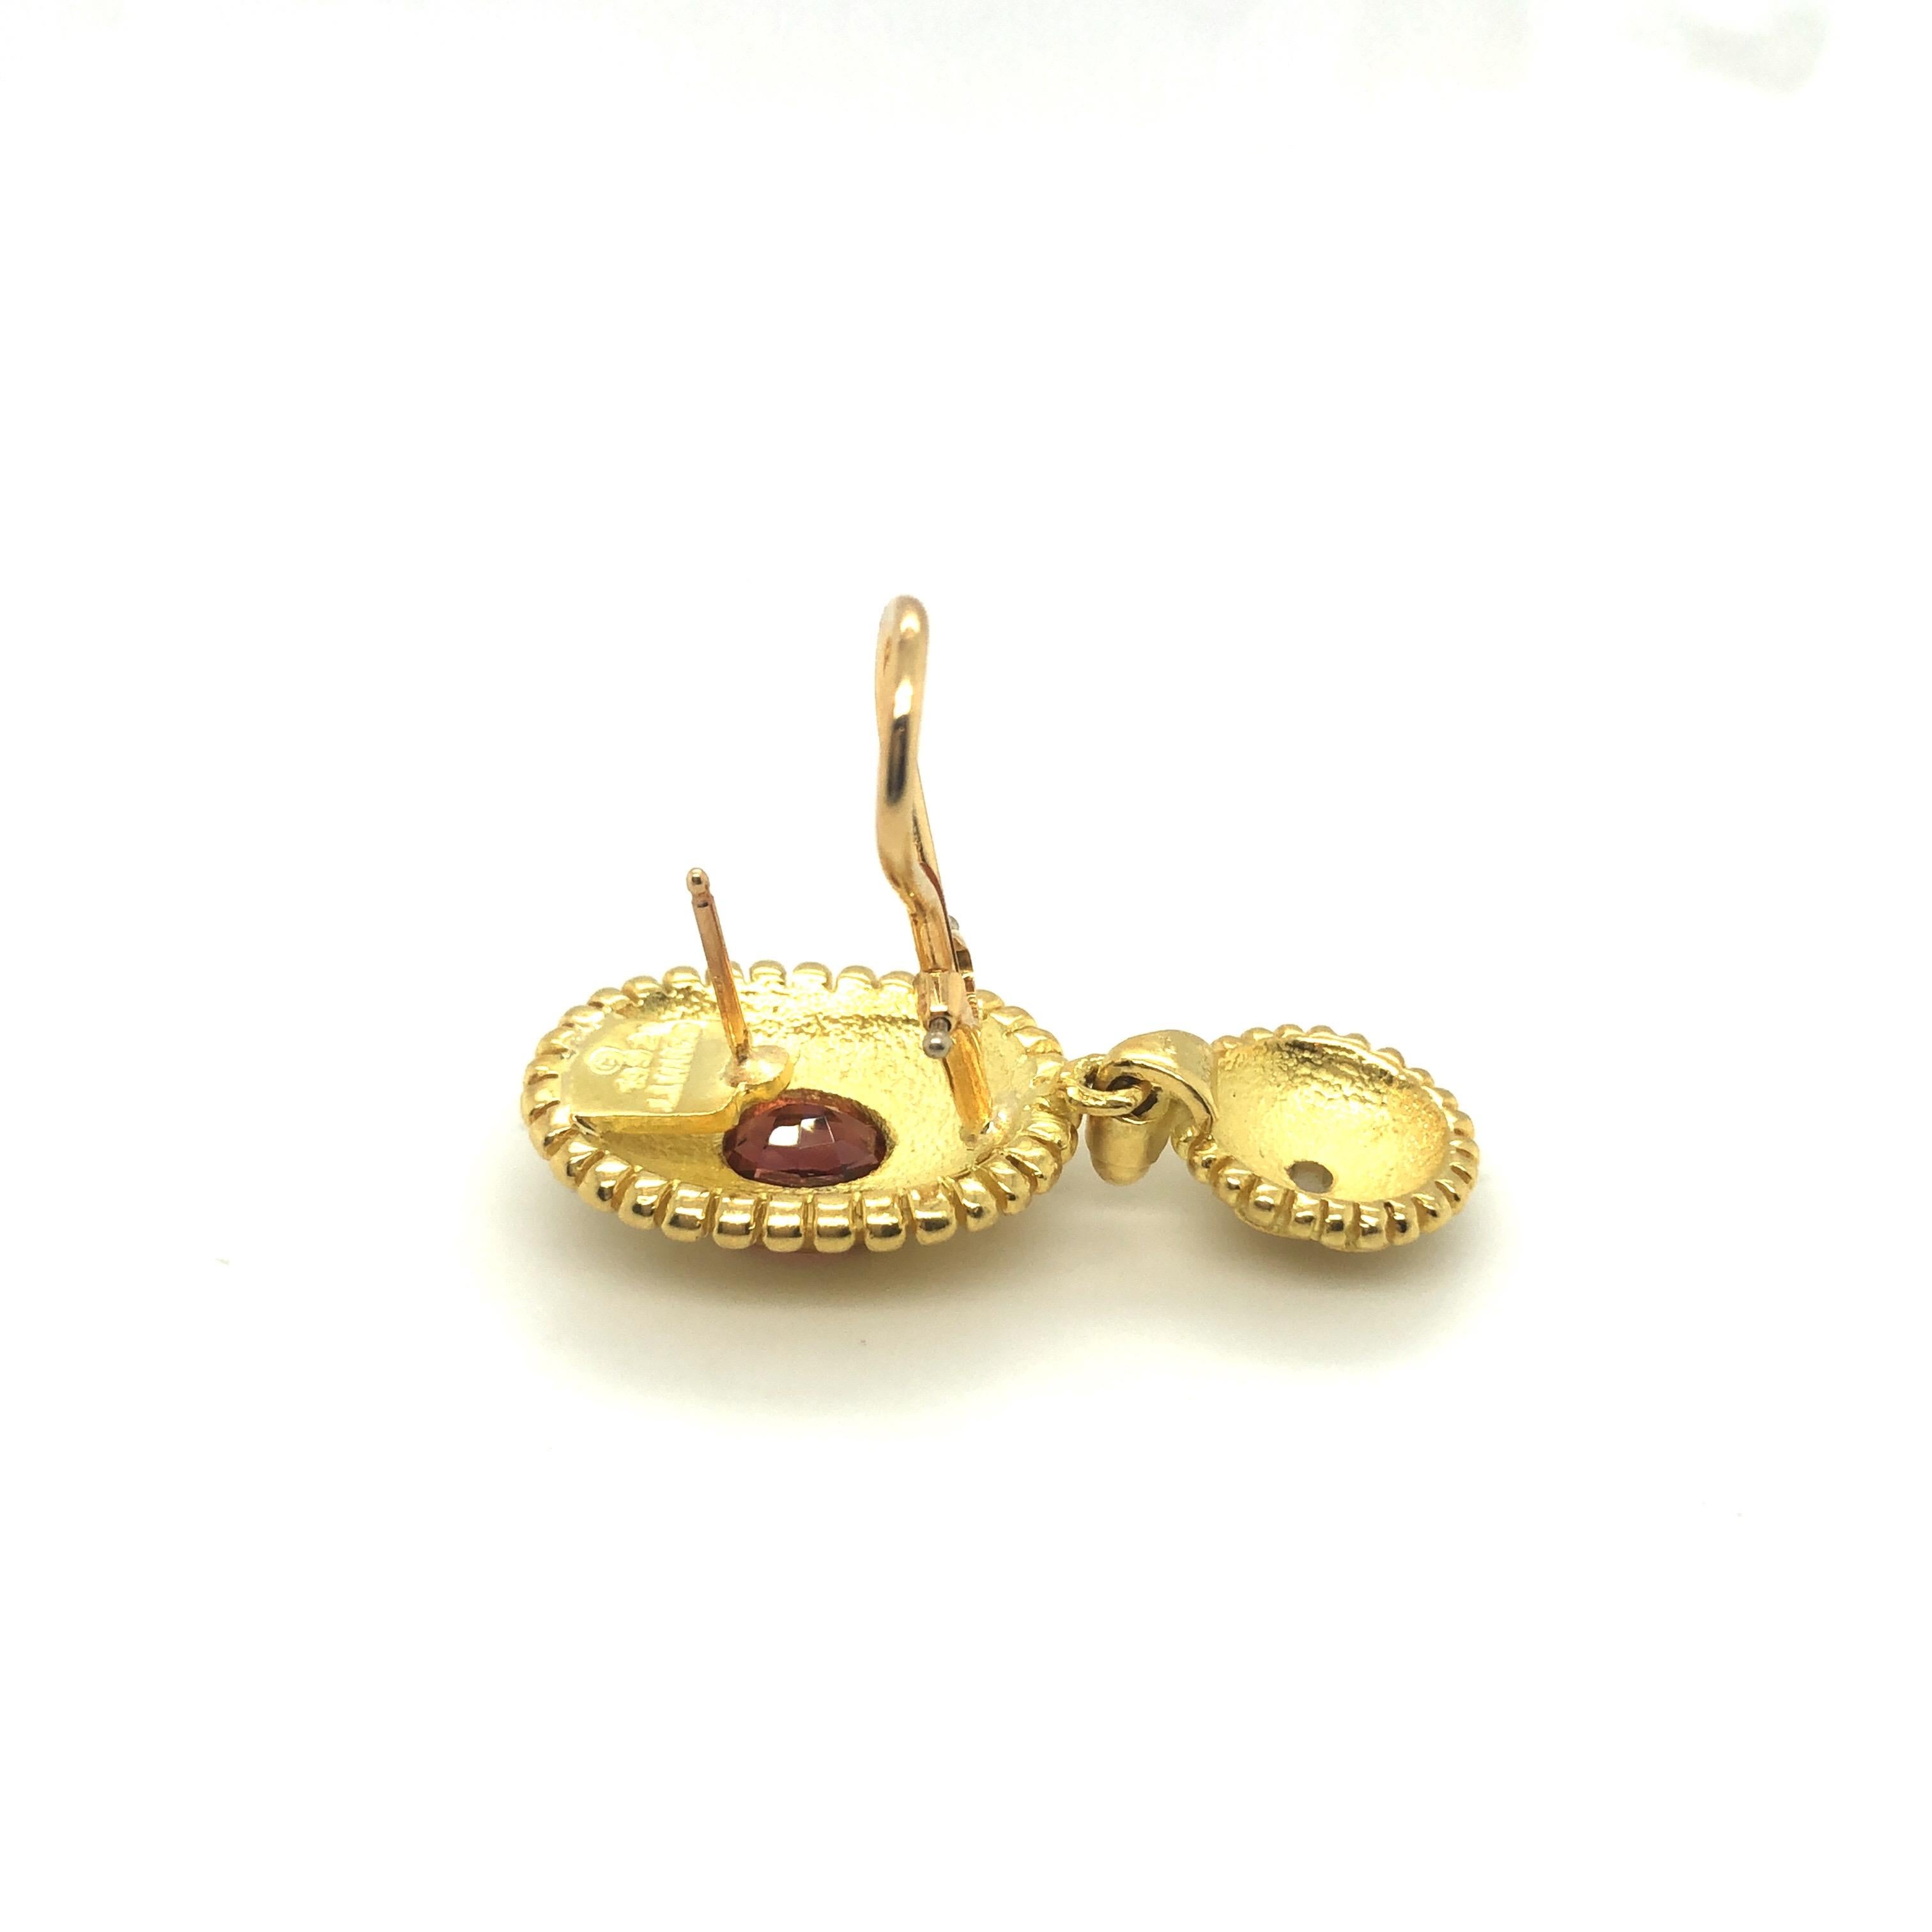 Etruscan Revival 18 Karat Yellow Gold Rhodolithe Garnet and Cultured Pearls Earrings